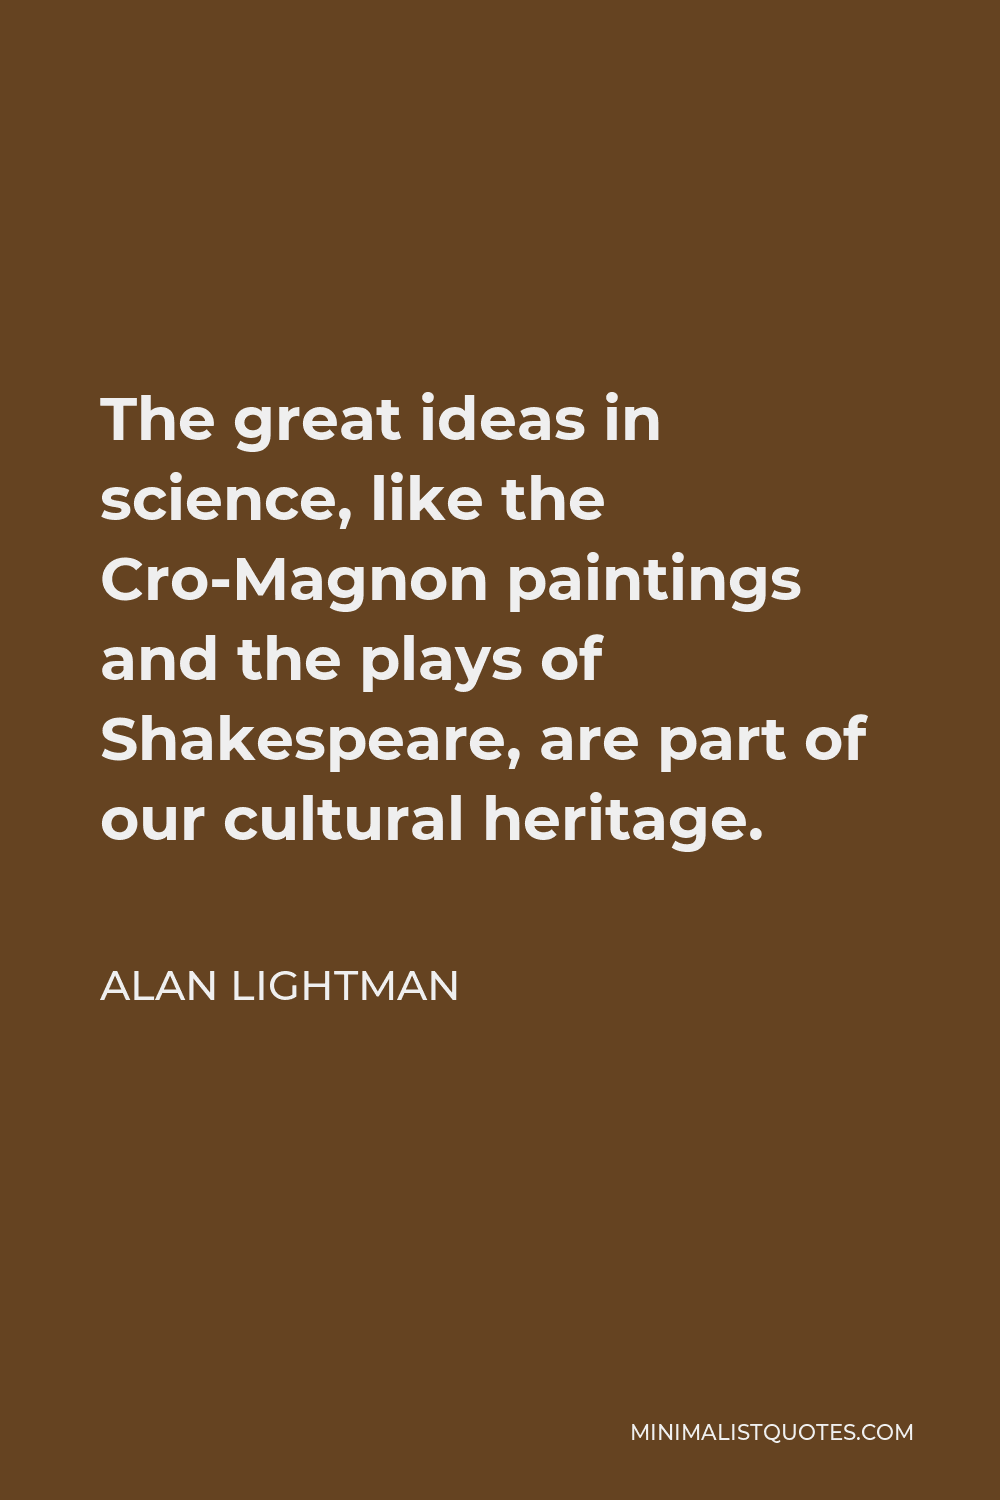 Alan Lightman Quote - The great ideas in science, like the Cro-Magnon paintings and the plays of Shakespeare, are part of our cultural heritage.